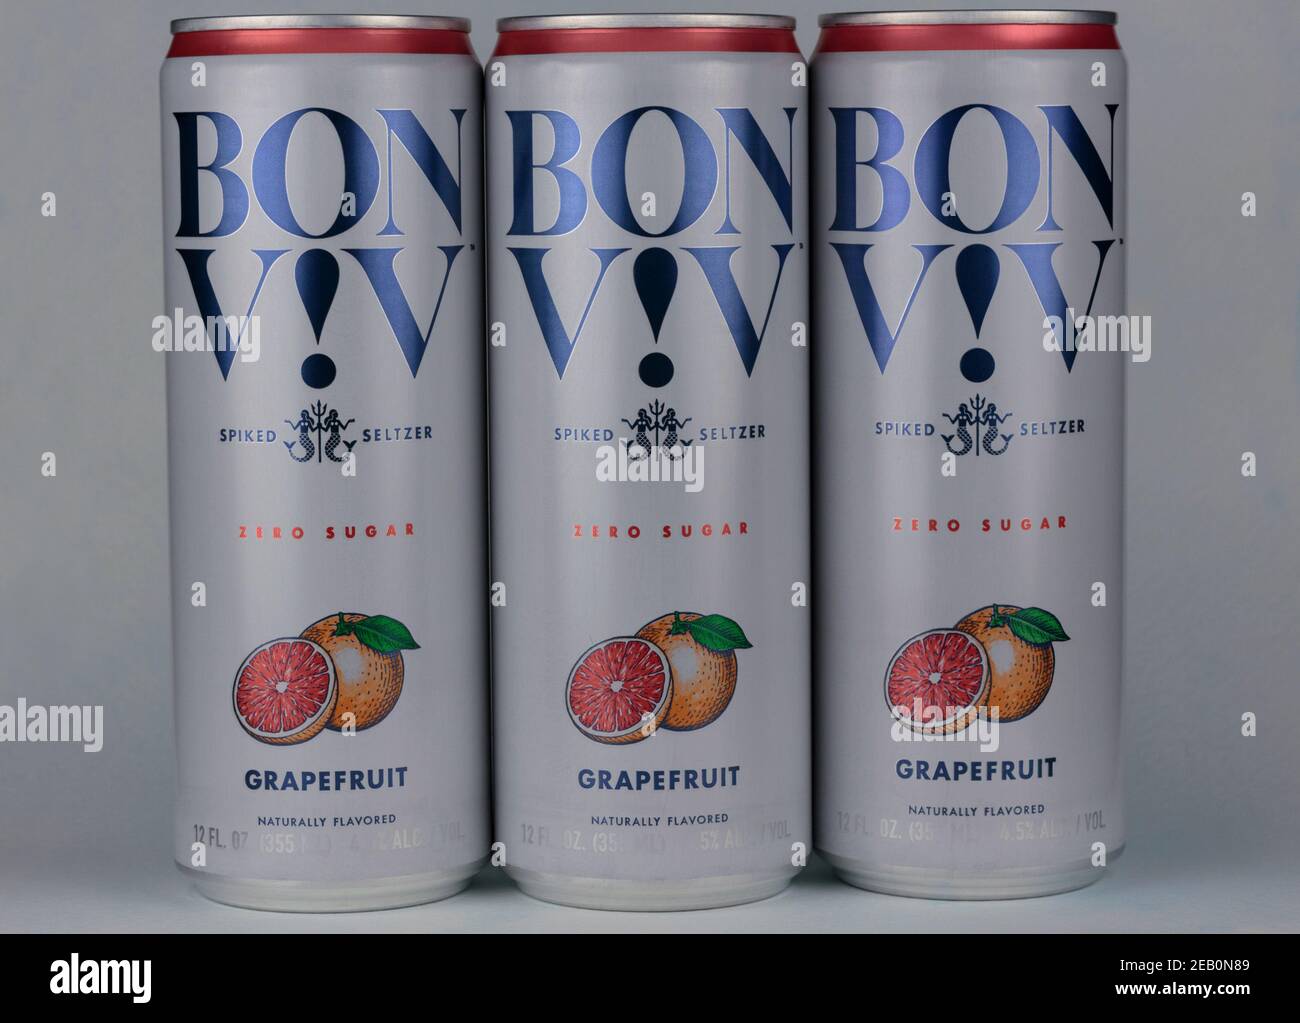 group of three cans of Bon Viv brand spiked seltzer, hard seltzer water with alcohol added, a popular beverage, on a pale blue background Stock Photo